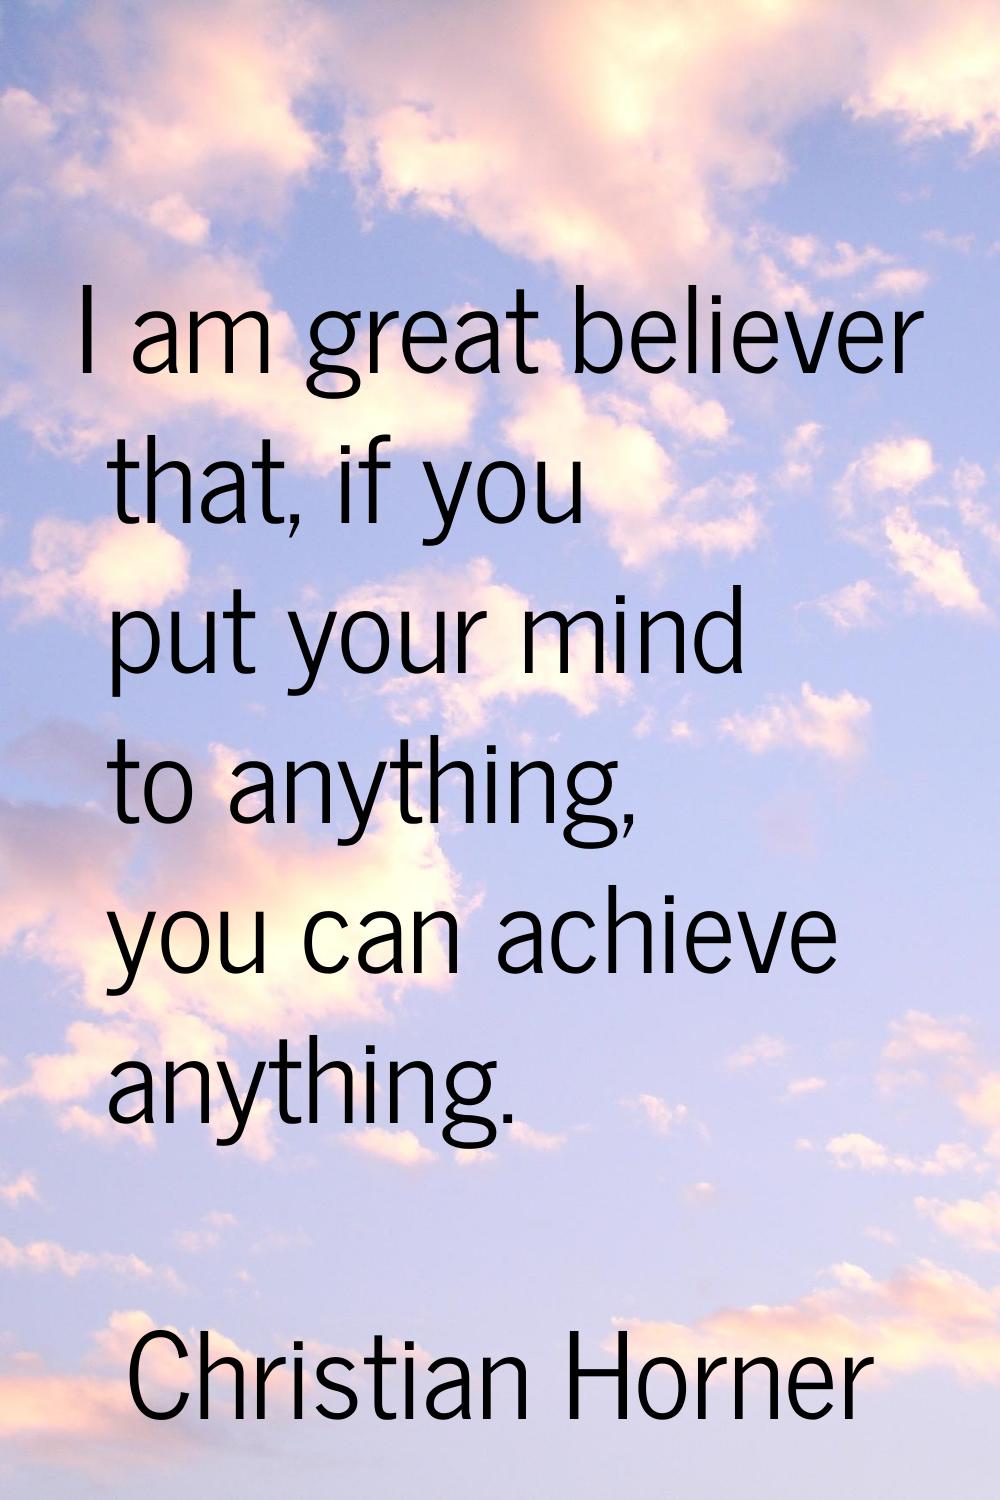 I am great believer that, if you put your mind to anything, you can achieve anything.